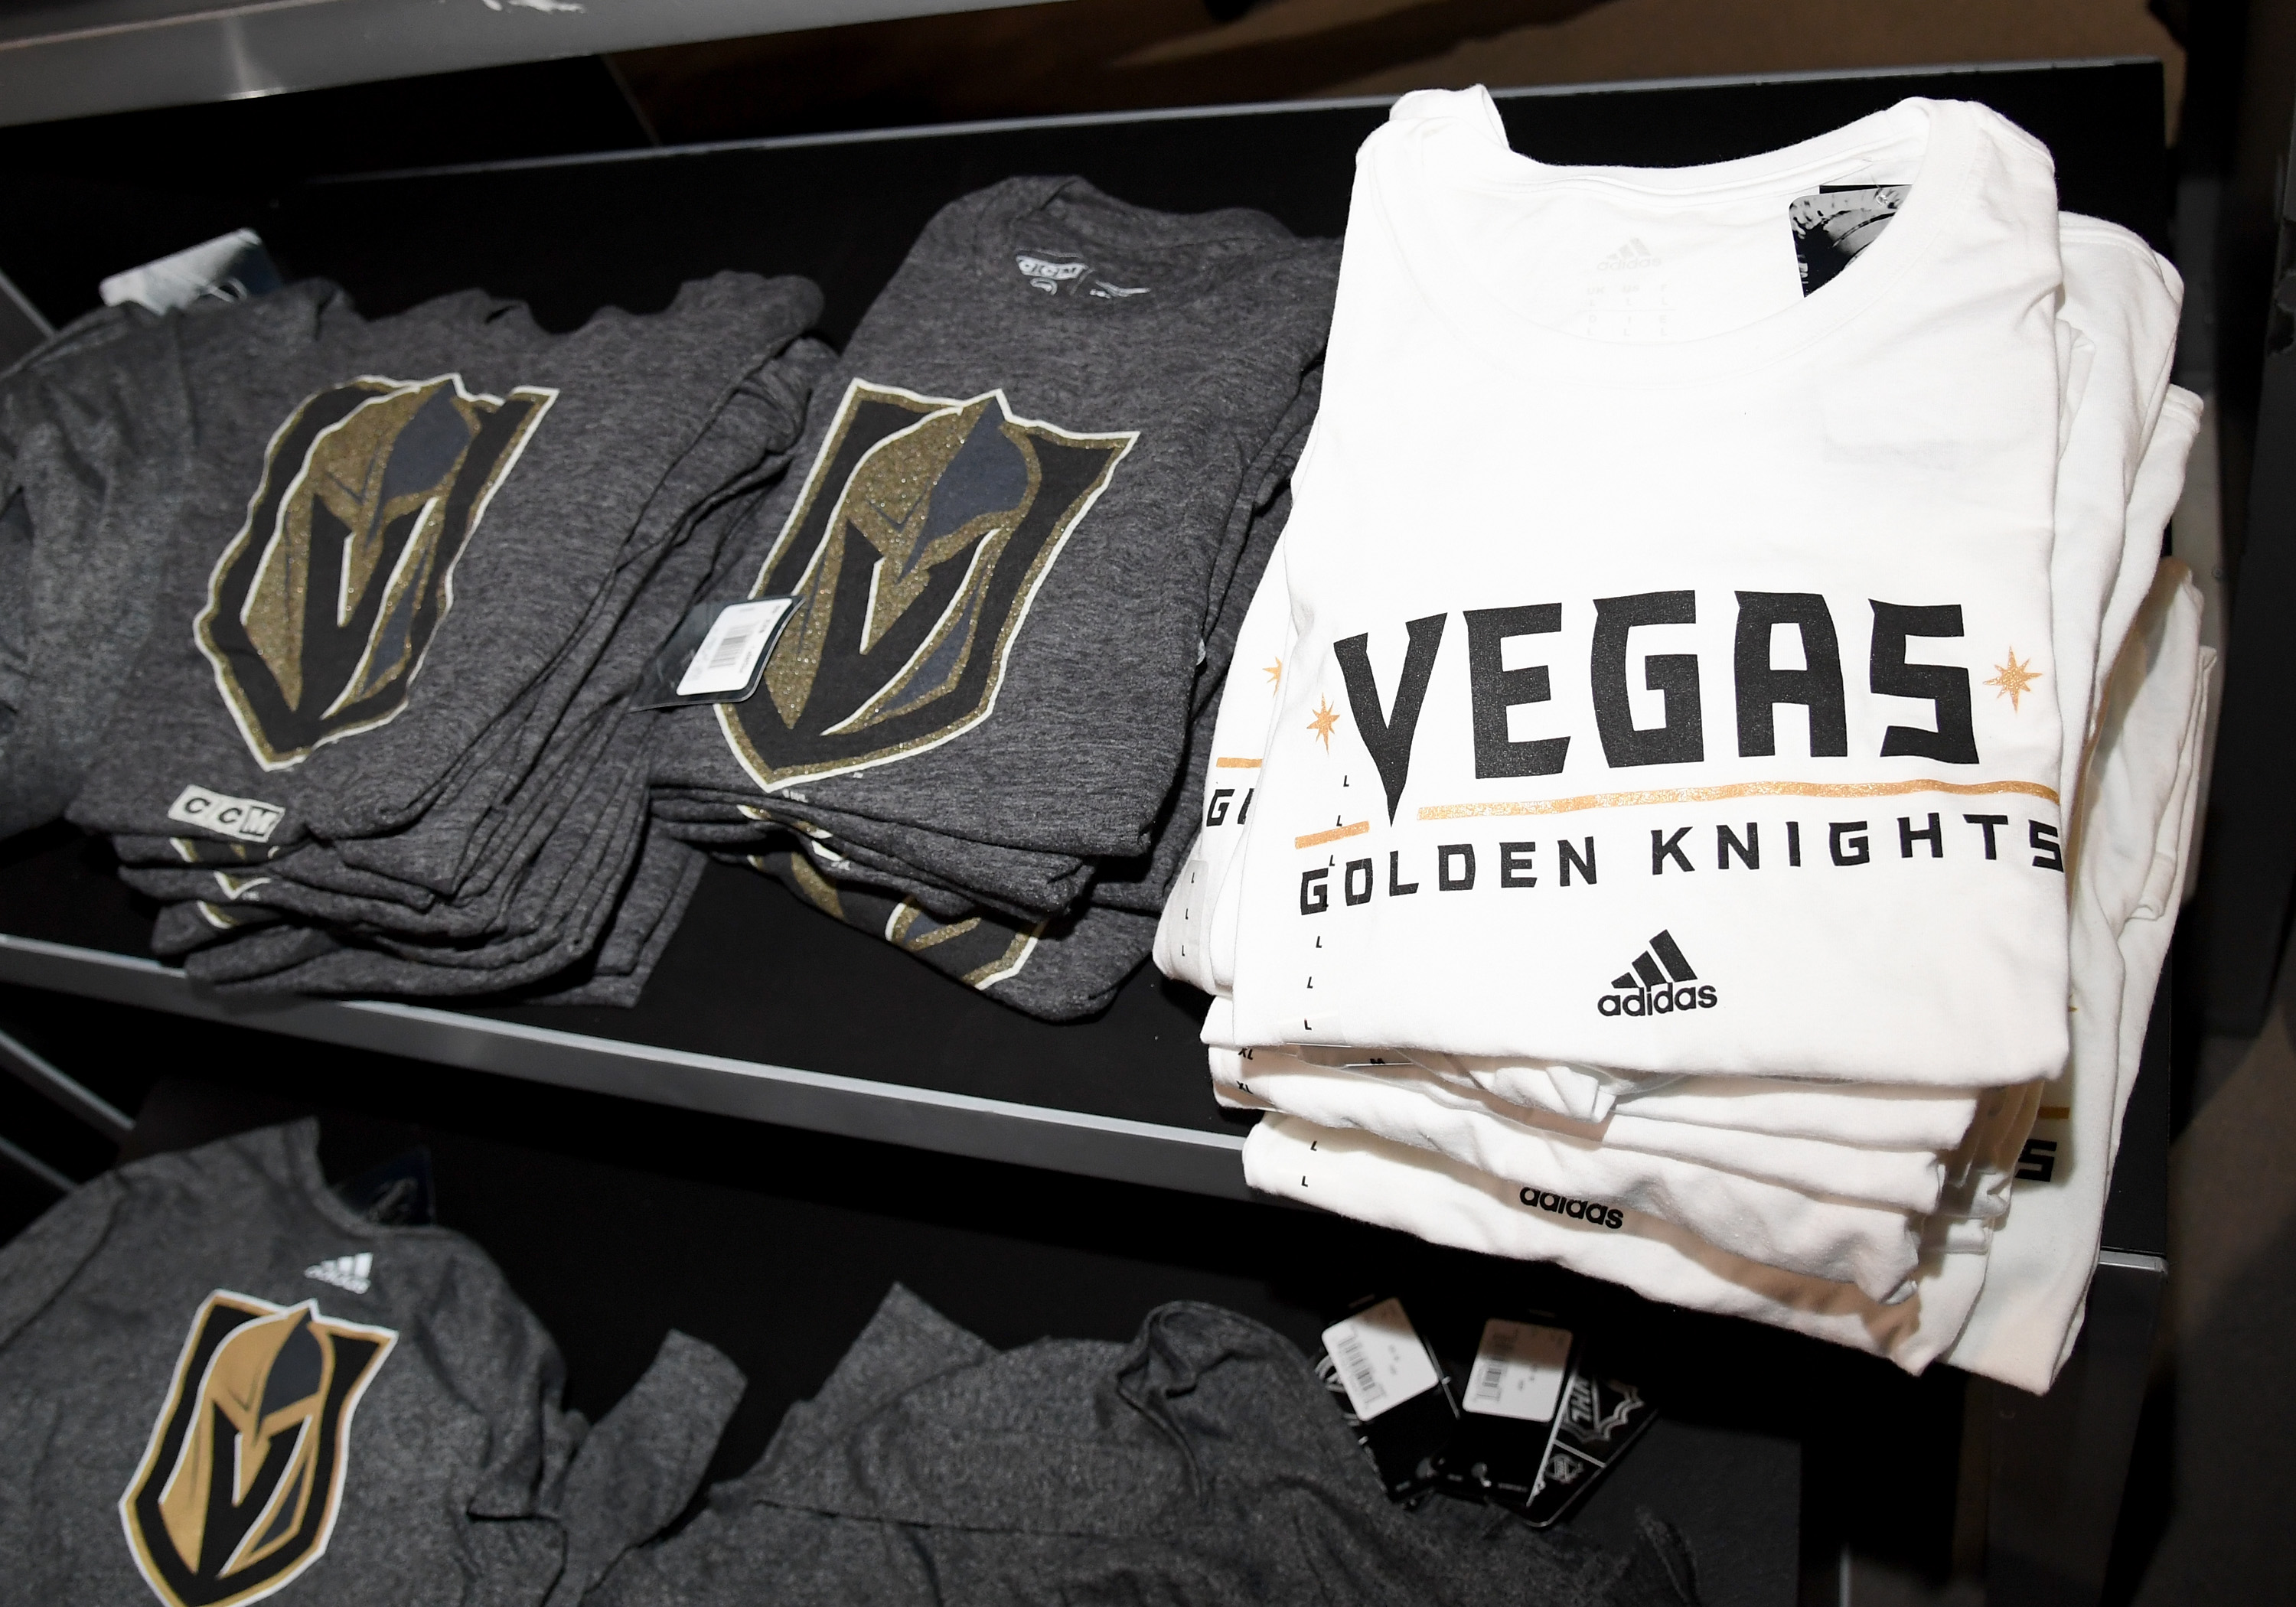 The Vegas Golden Knights are now in existence